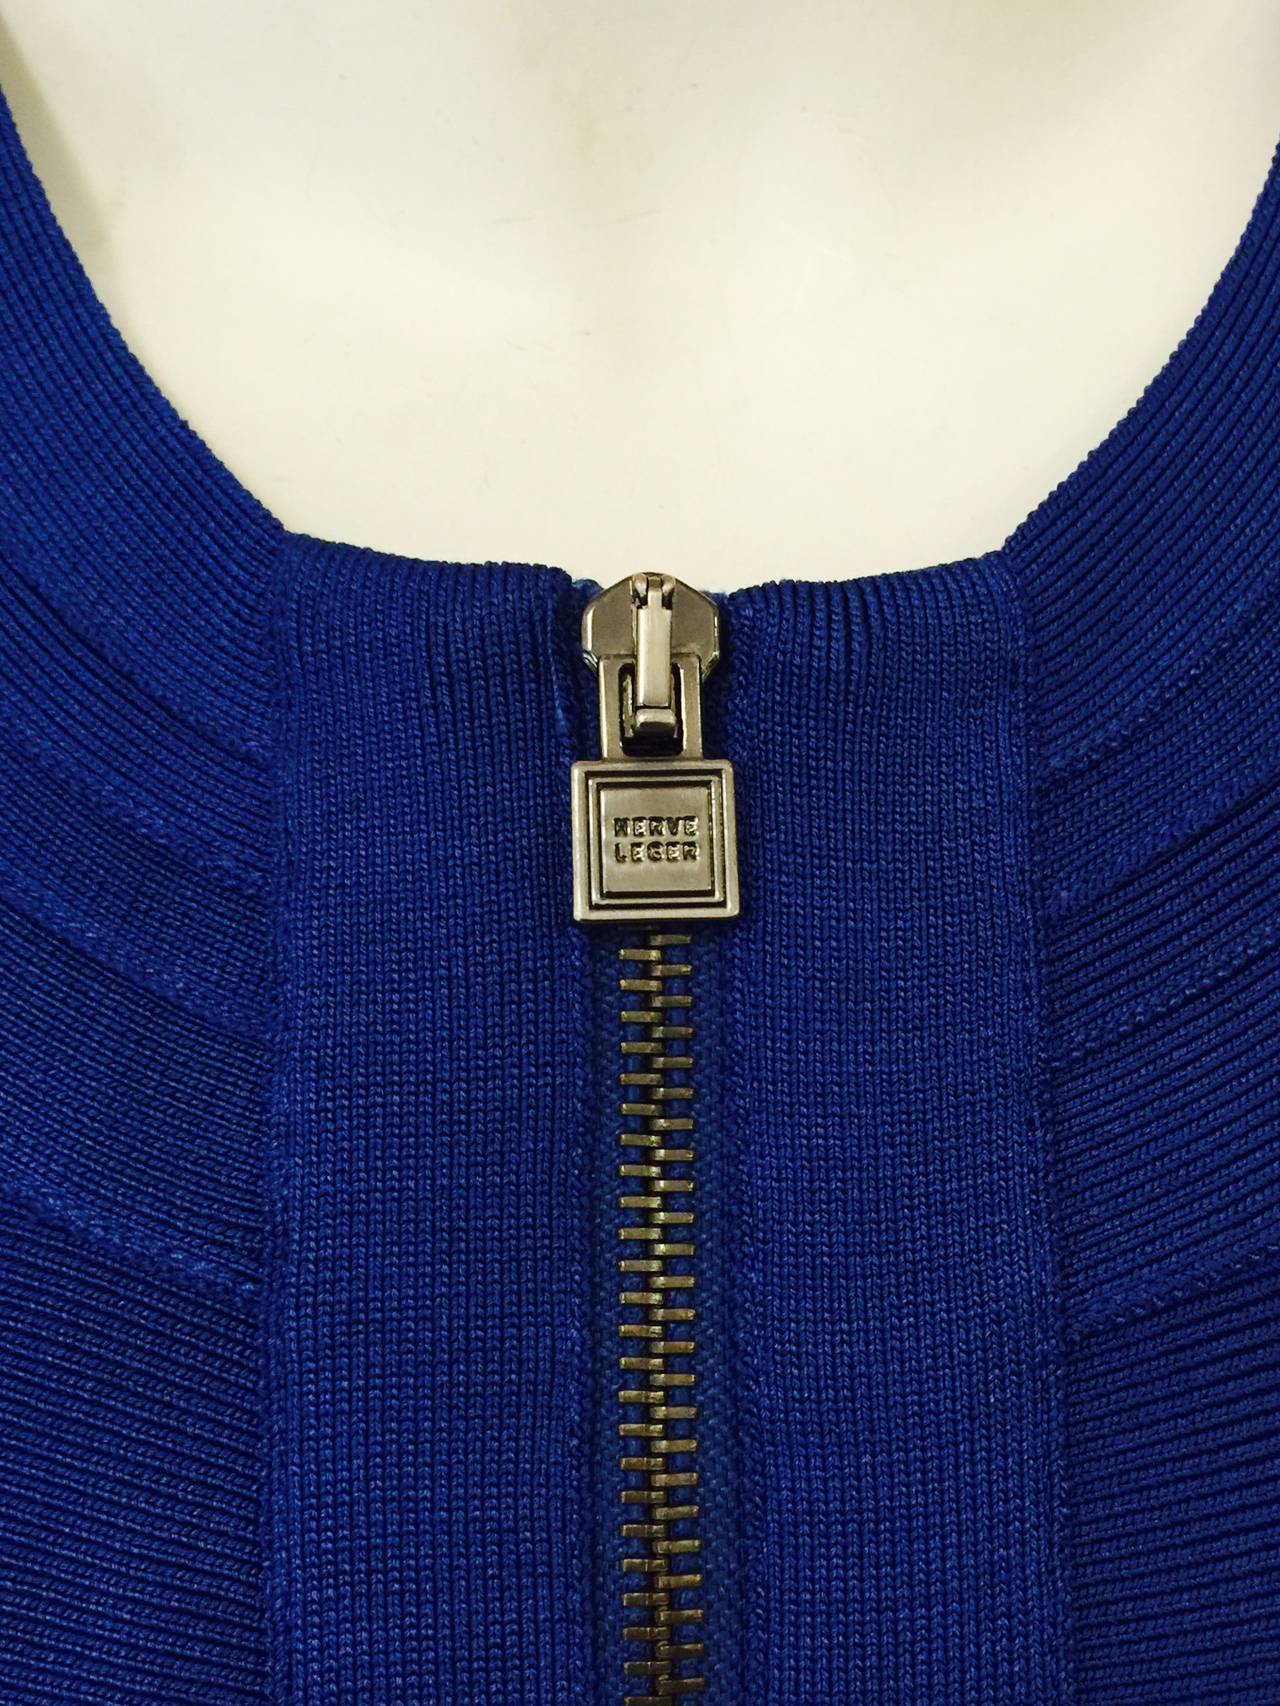 Iconic Banded Sapphire Blue Herve Leger Veleka Top For Sale 2